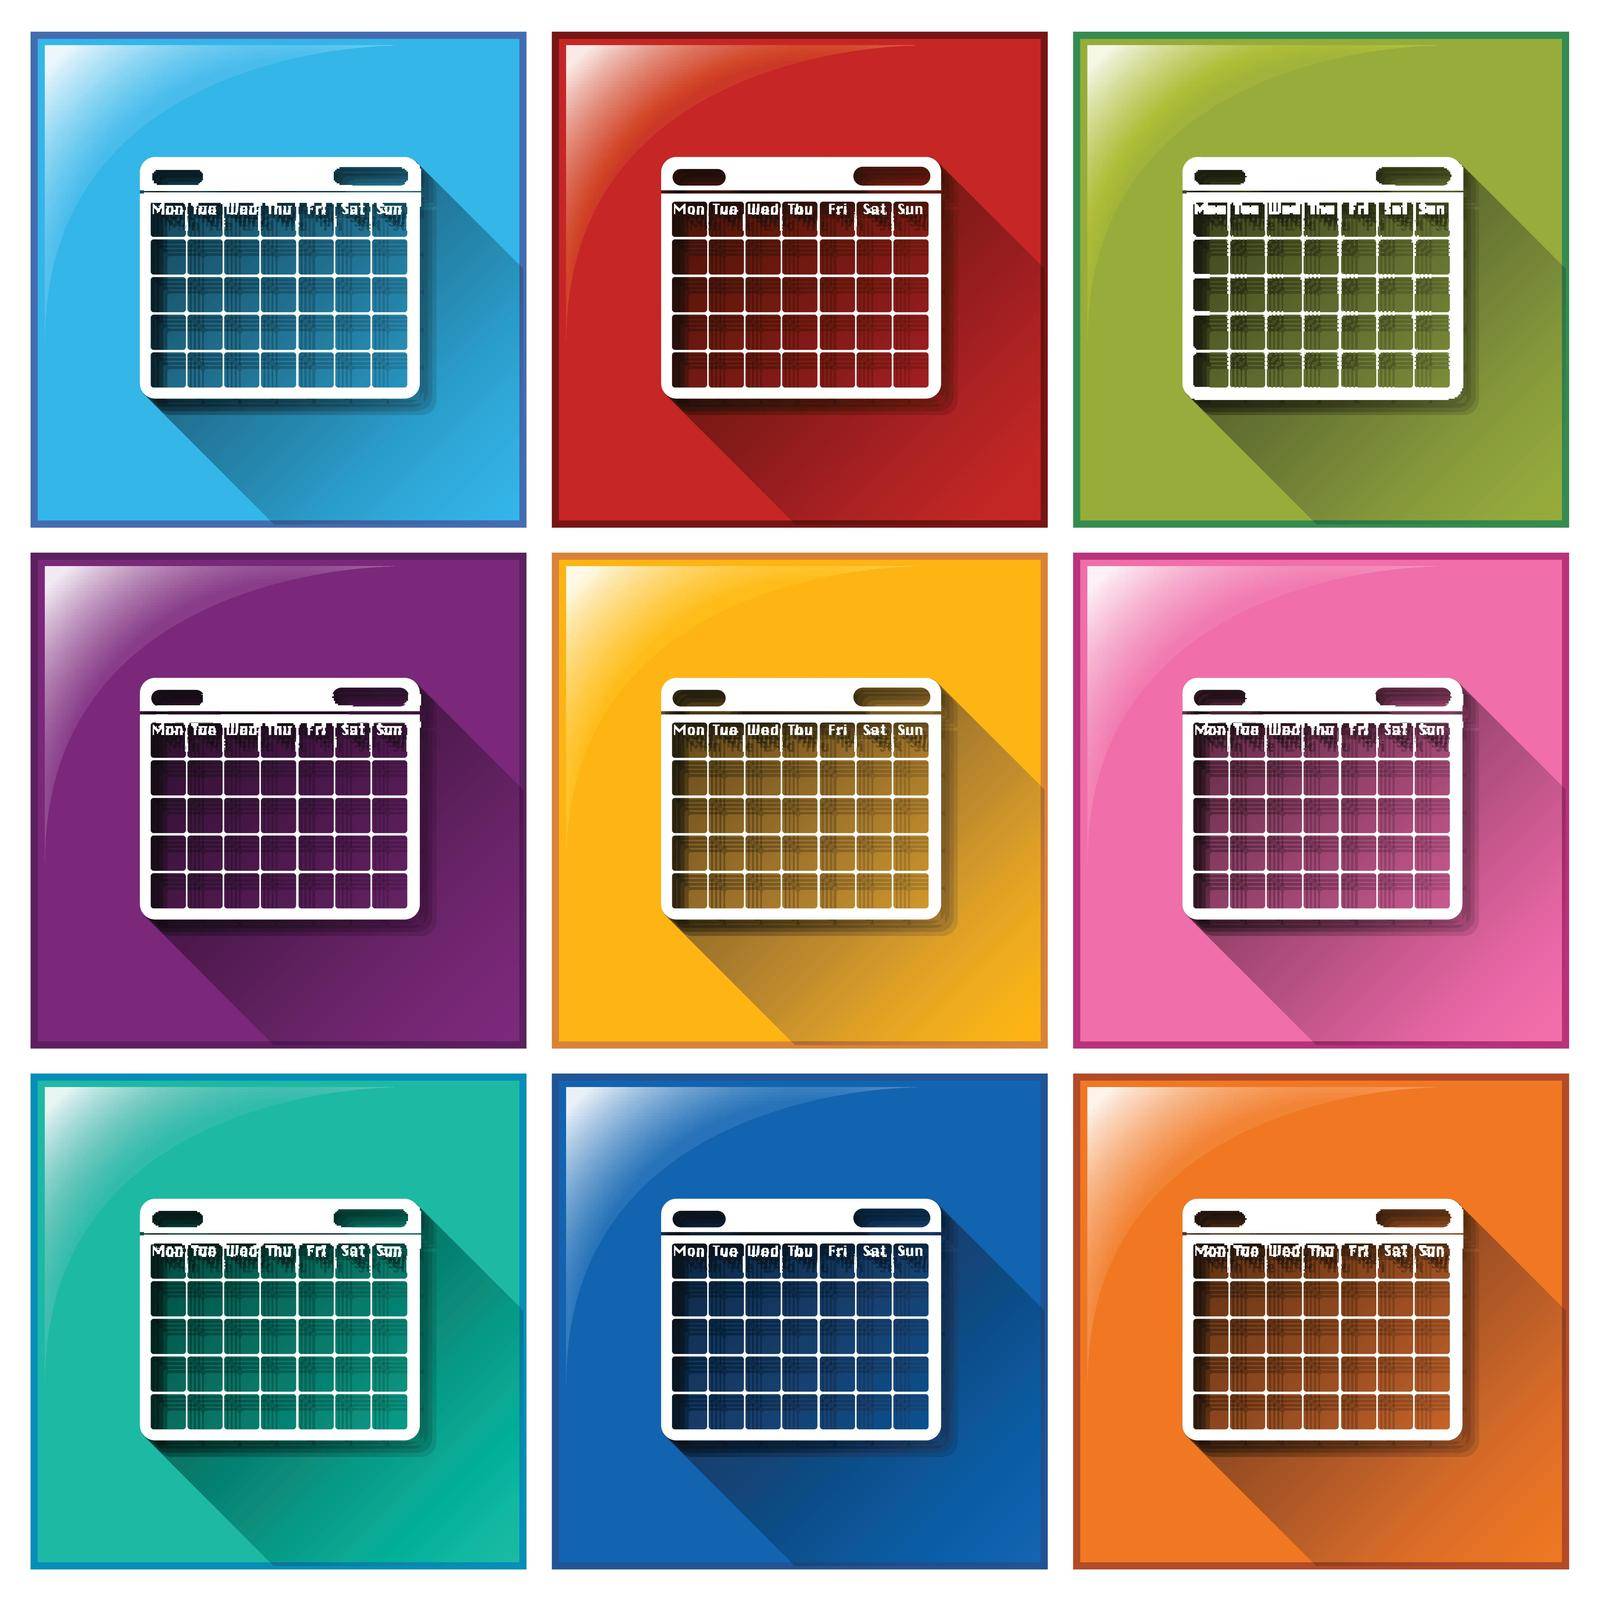 Colourful calendar icons on a white background